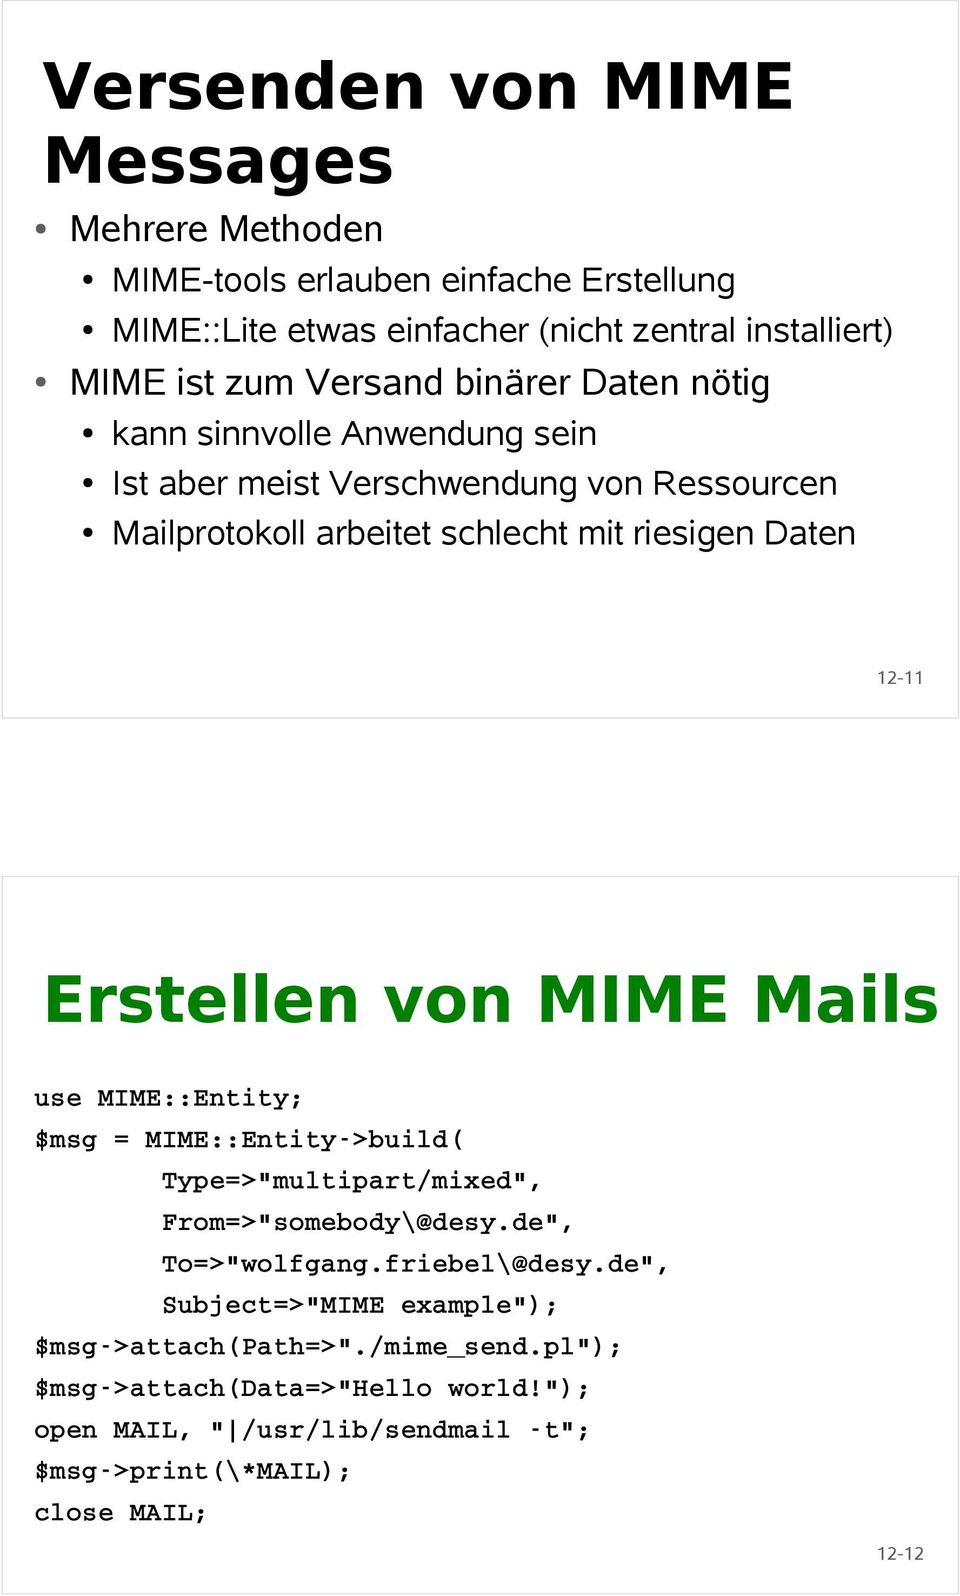 de", Subject=>"MIME example"); $msg->attach(path=>"./mime_send.